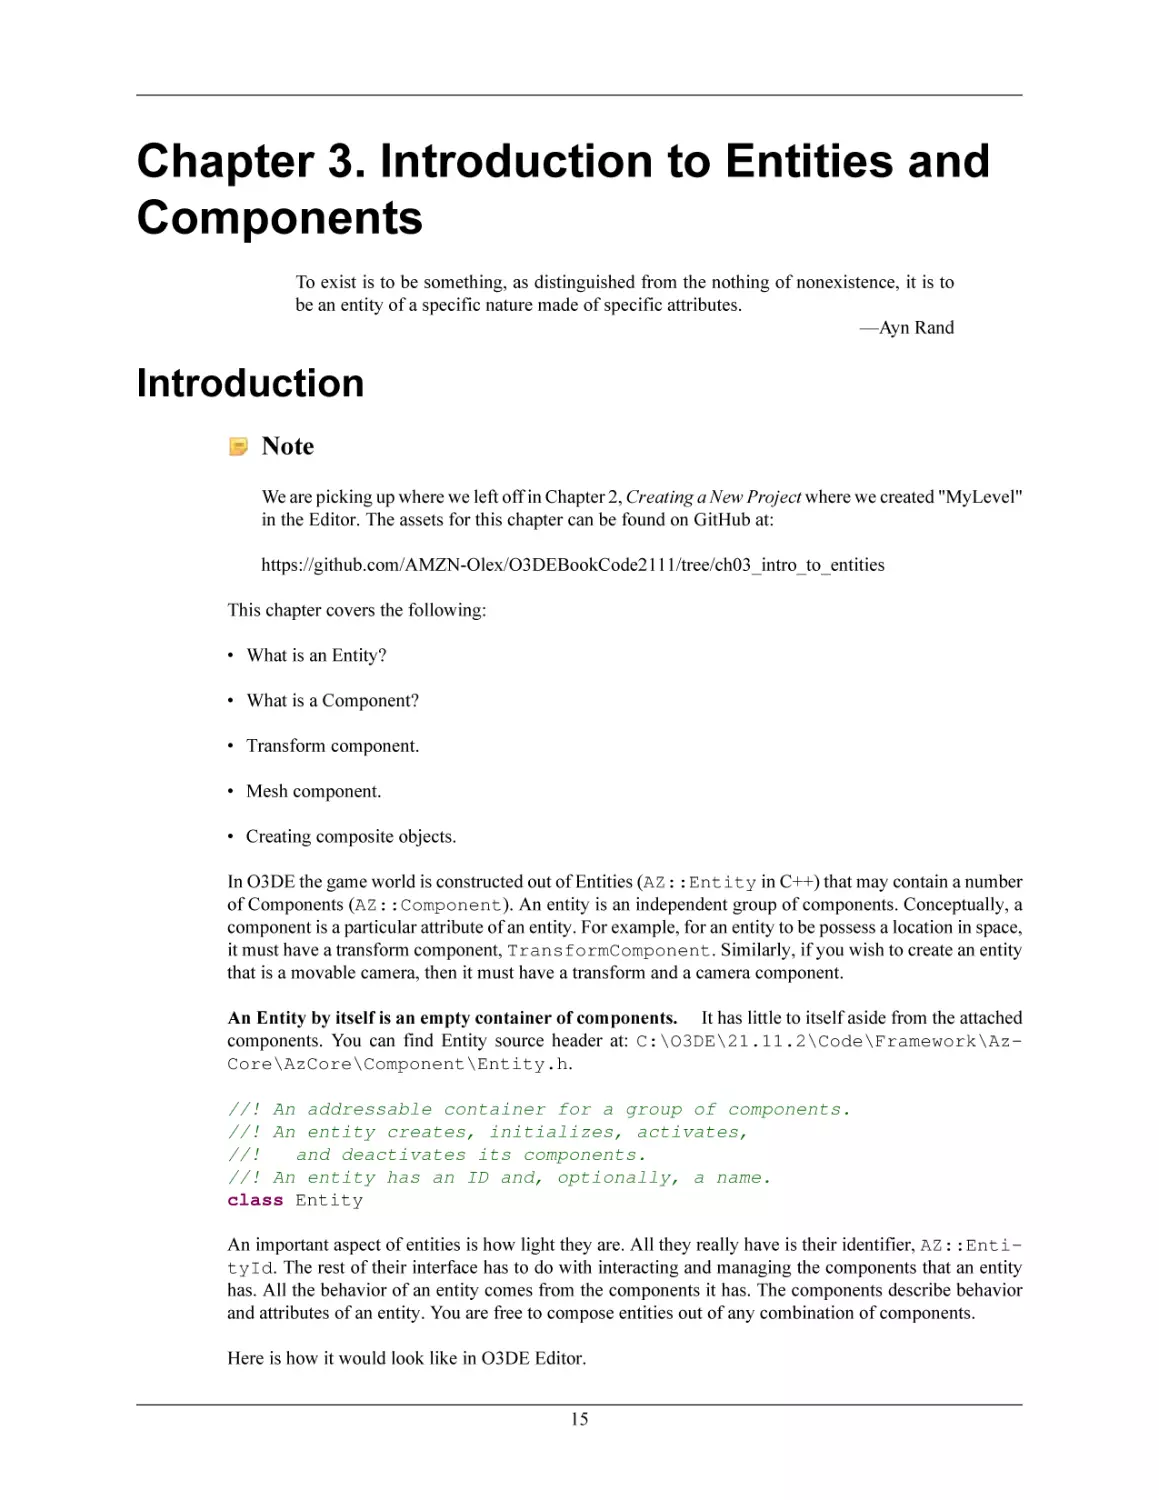 Chapter 3. Introduction to Entities and Components
Introduction